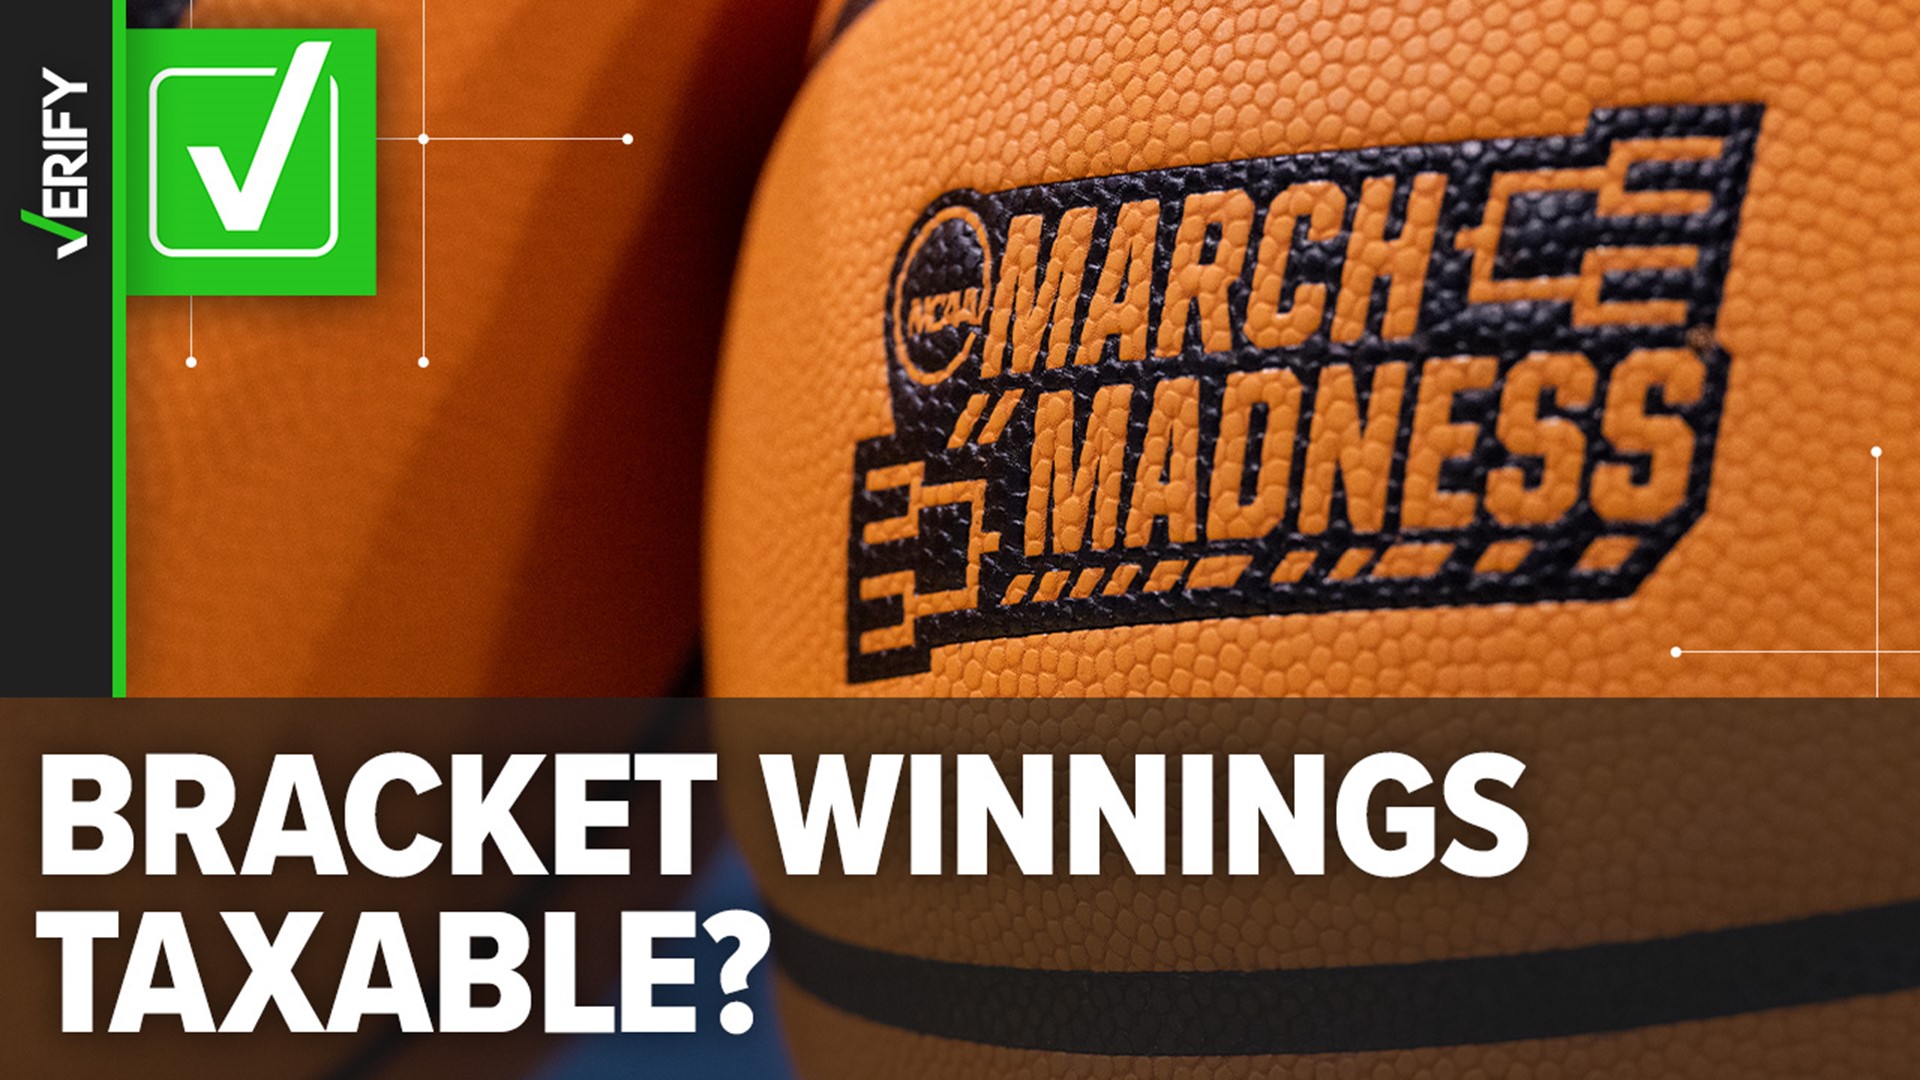 Federal tax law requires you to report gambling winnings, whether you’re betting in your office pool, at the casino or online during March Madness.